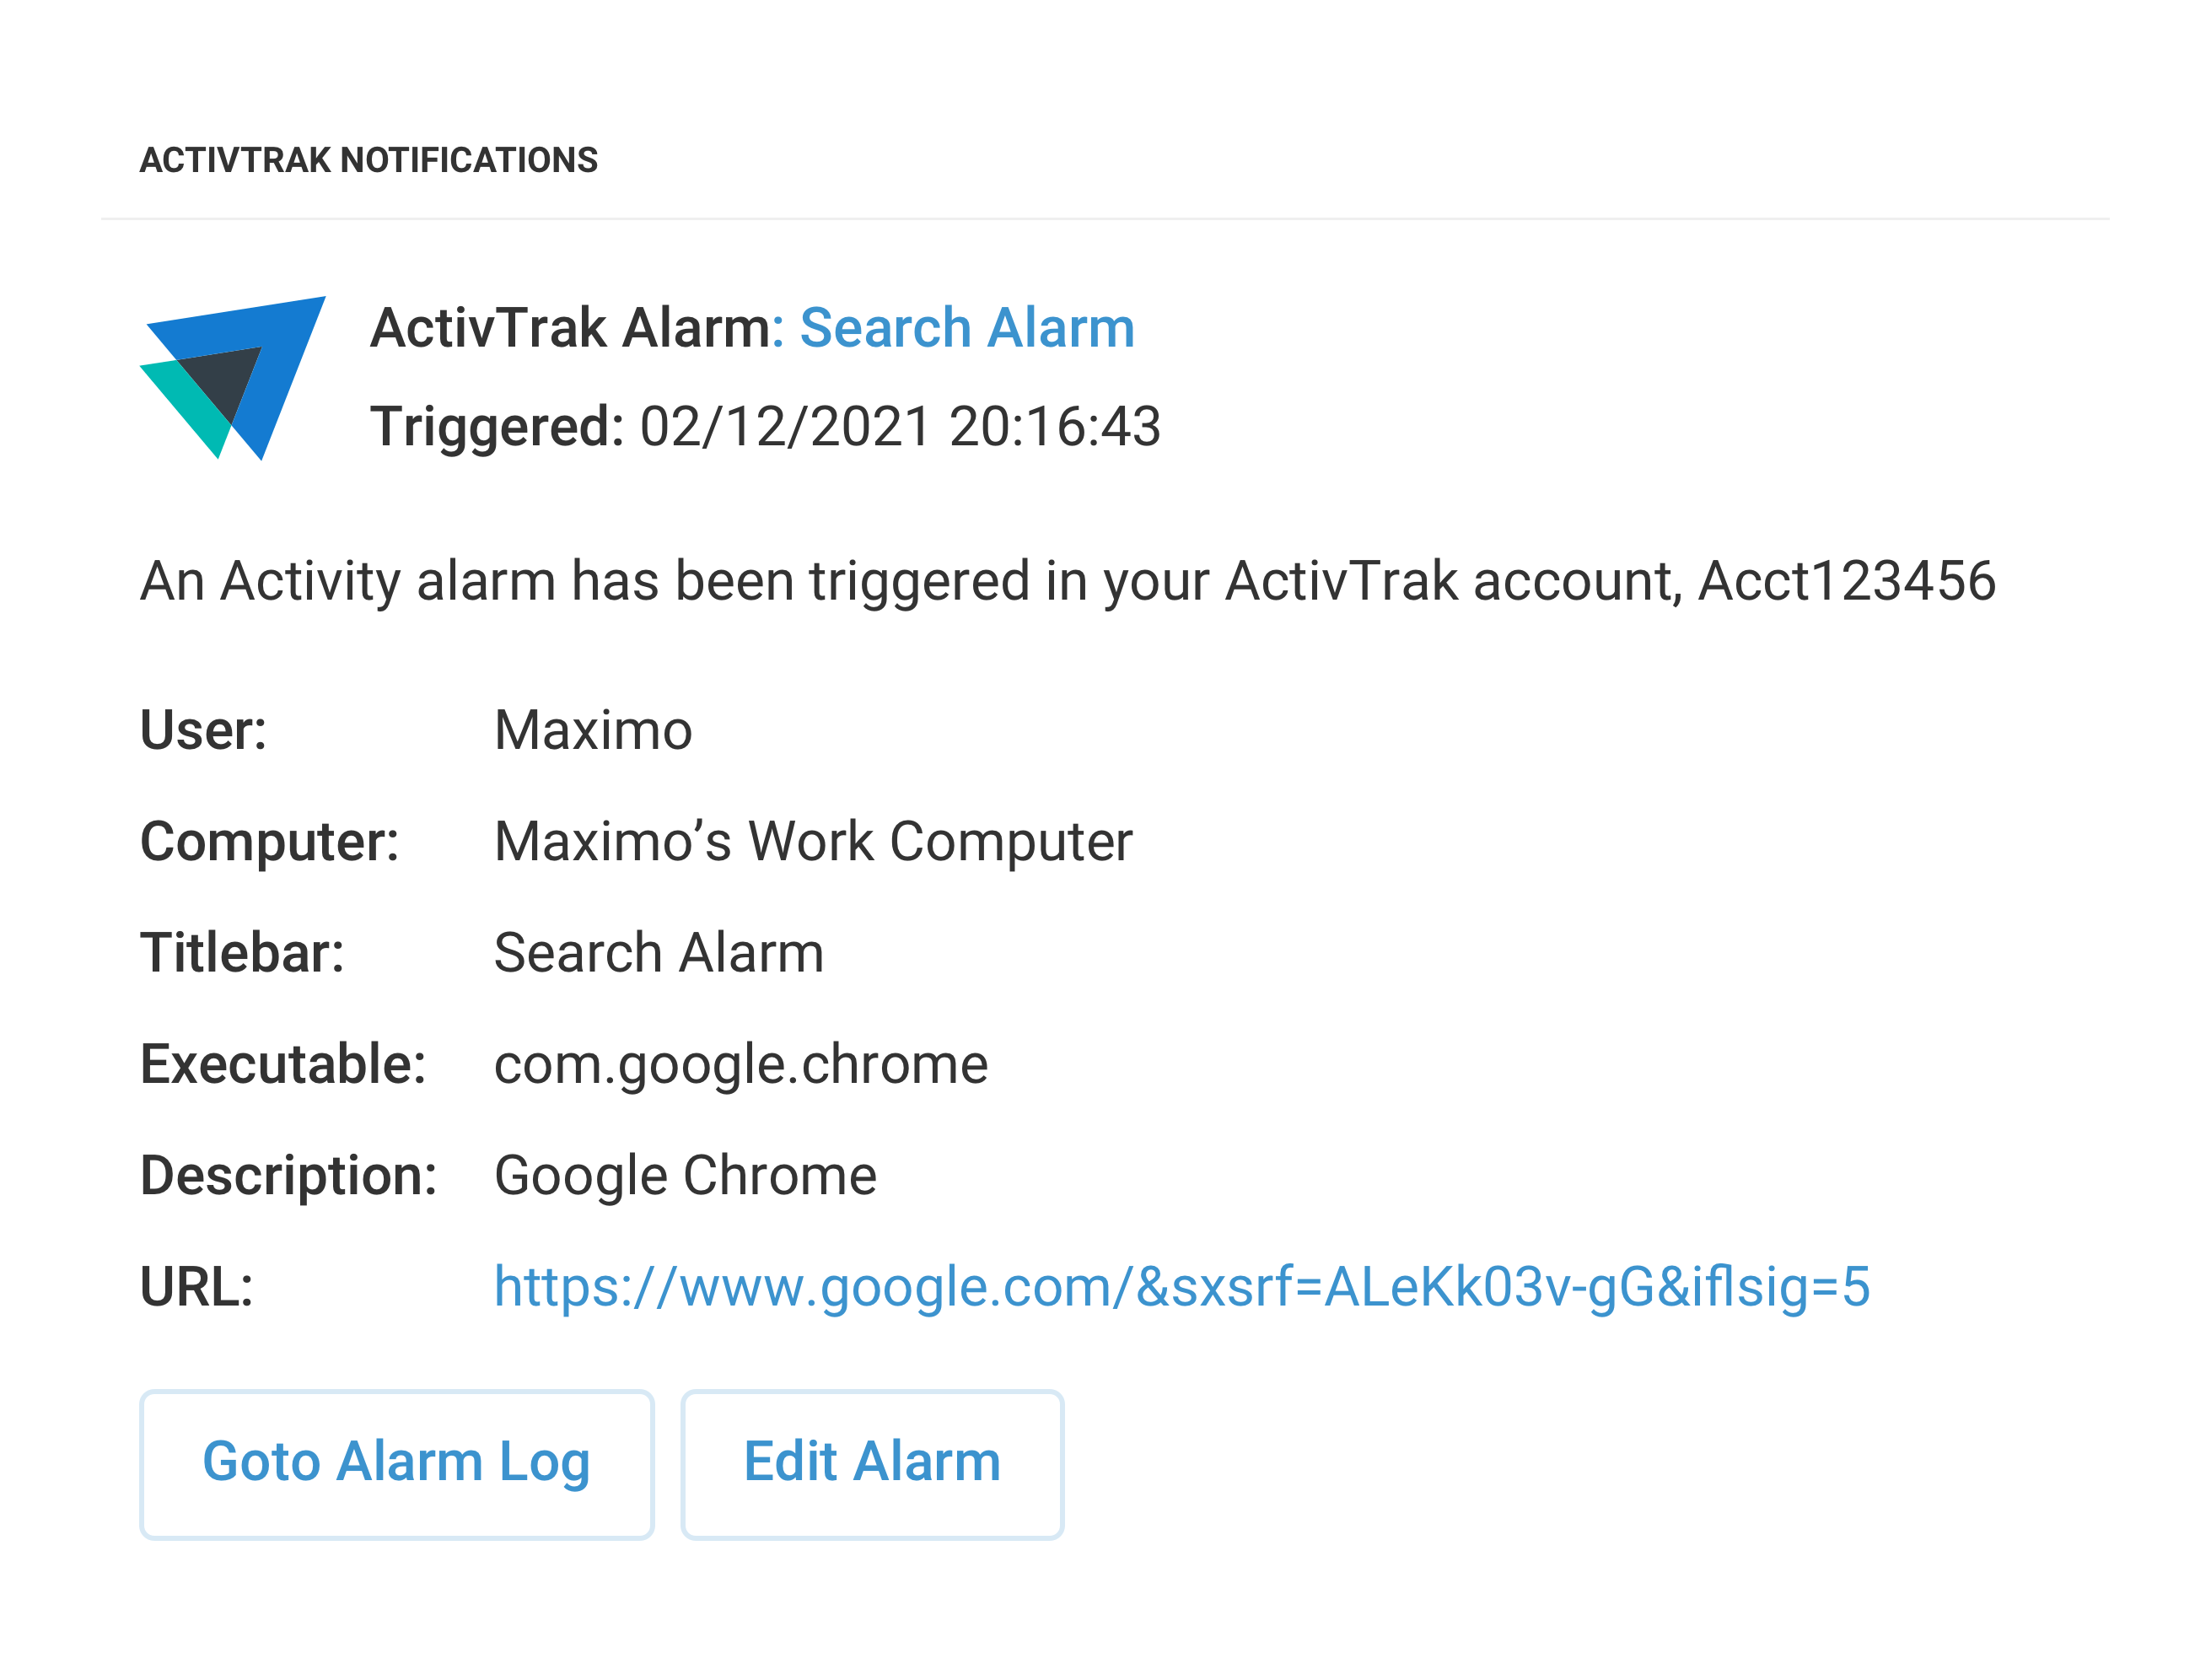 An ActivTrak alarm notification titled Search Alarm, showing a triggered activity alarm.